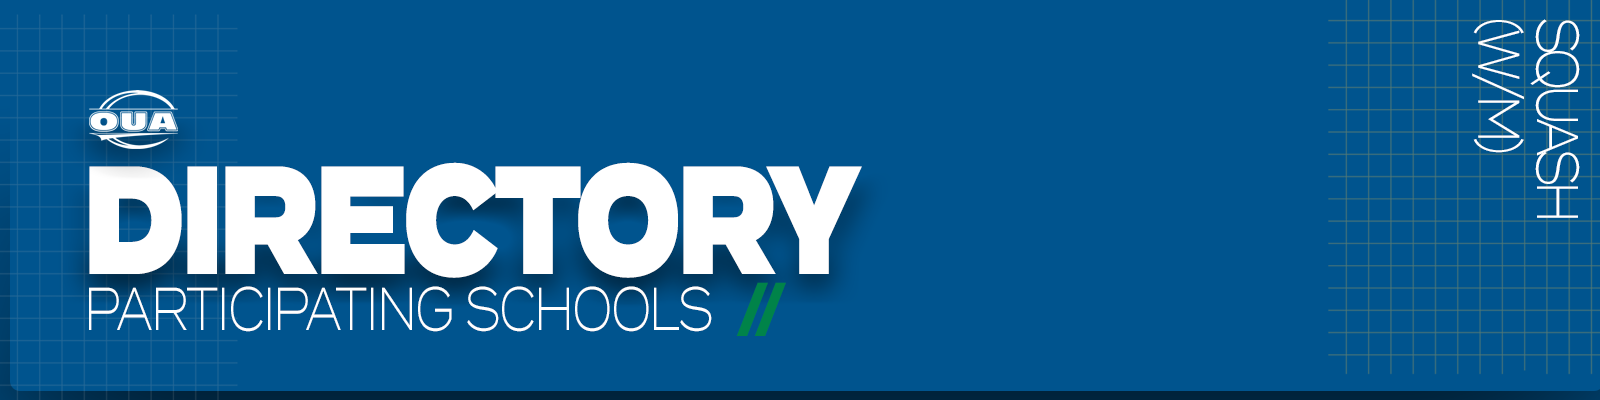 Predominantly blue graphic with large white text on the left side that reads 'Directory, Participating Schools' and small white vertical text on the right side that reads 'Squash'